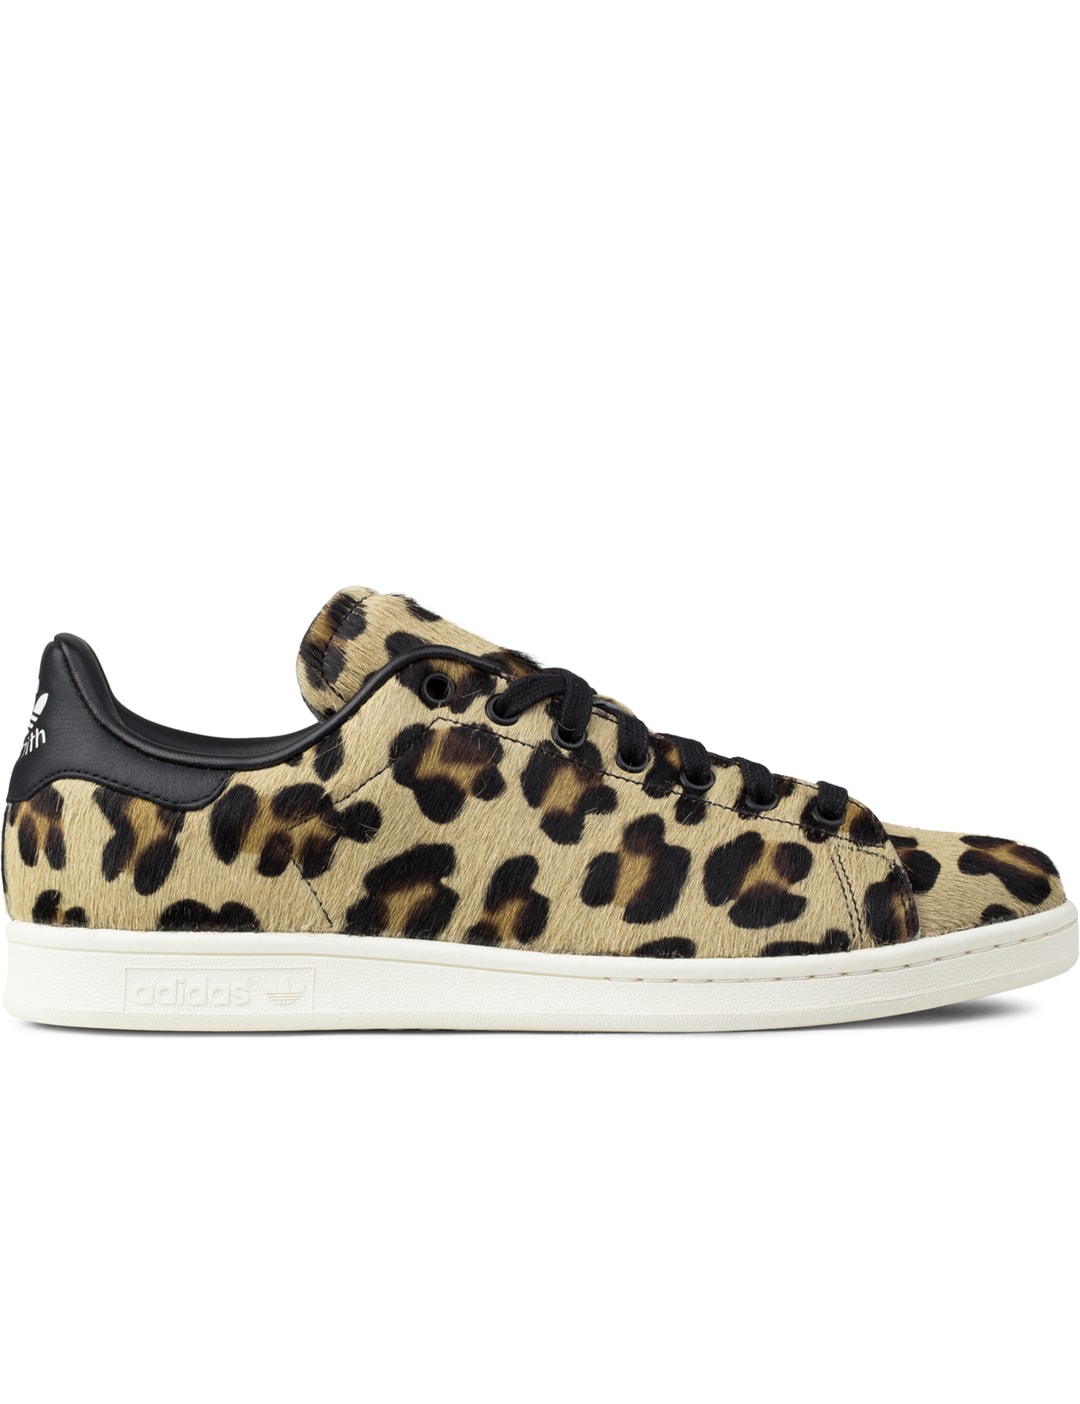 Adidas Originals - Stan Smith Pony Hair Leopard | HBX - Fashion and Lifestyle by Hypebeast